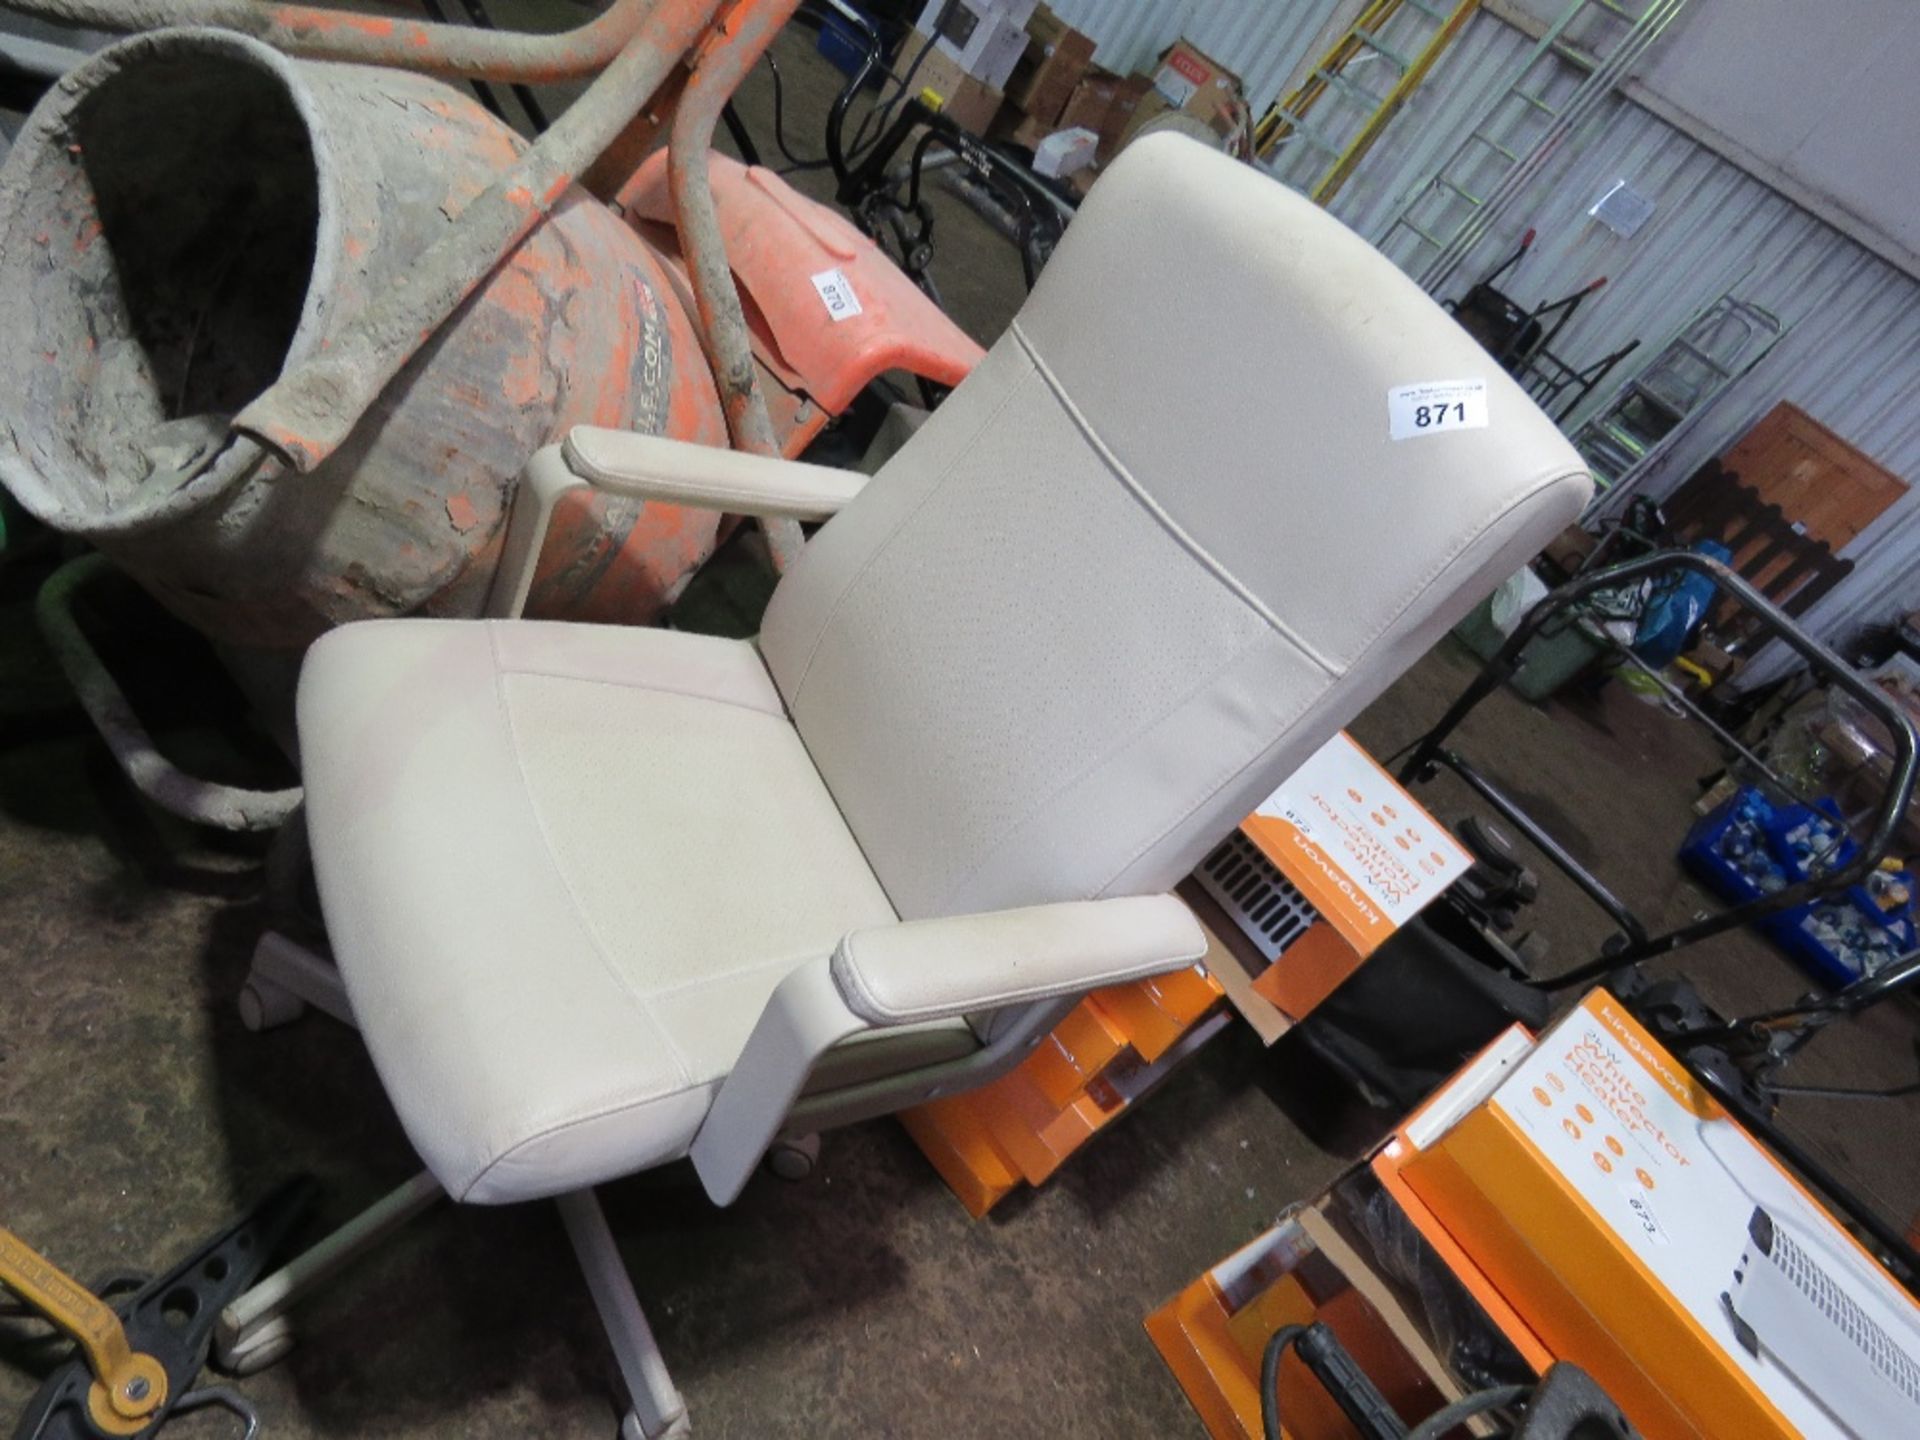 CREAM COLOURED OFFICE CHAIR. THIS LOT IS SOLD UNDER THE AUCTIONEERS MARGIN SCHEME, THEREFORE NO